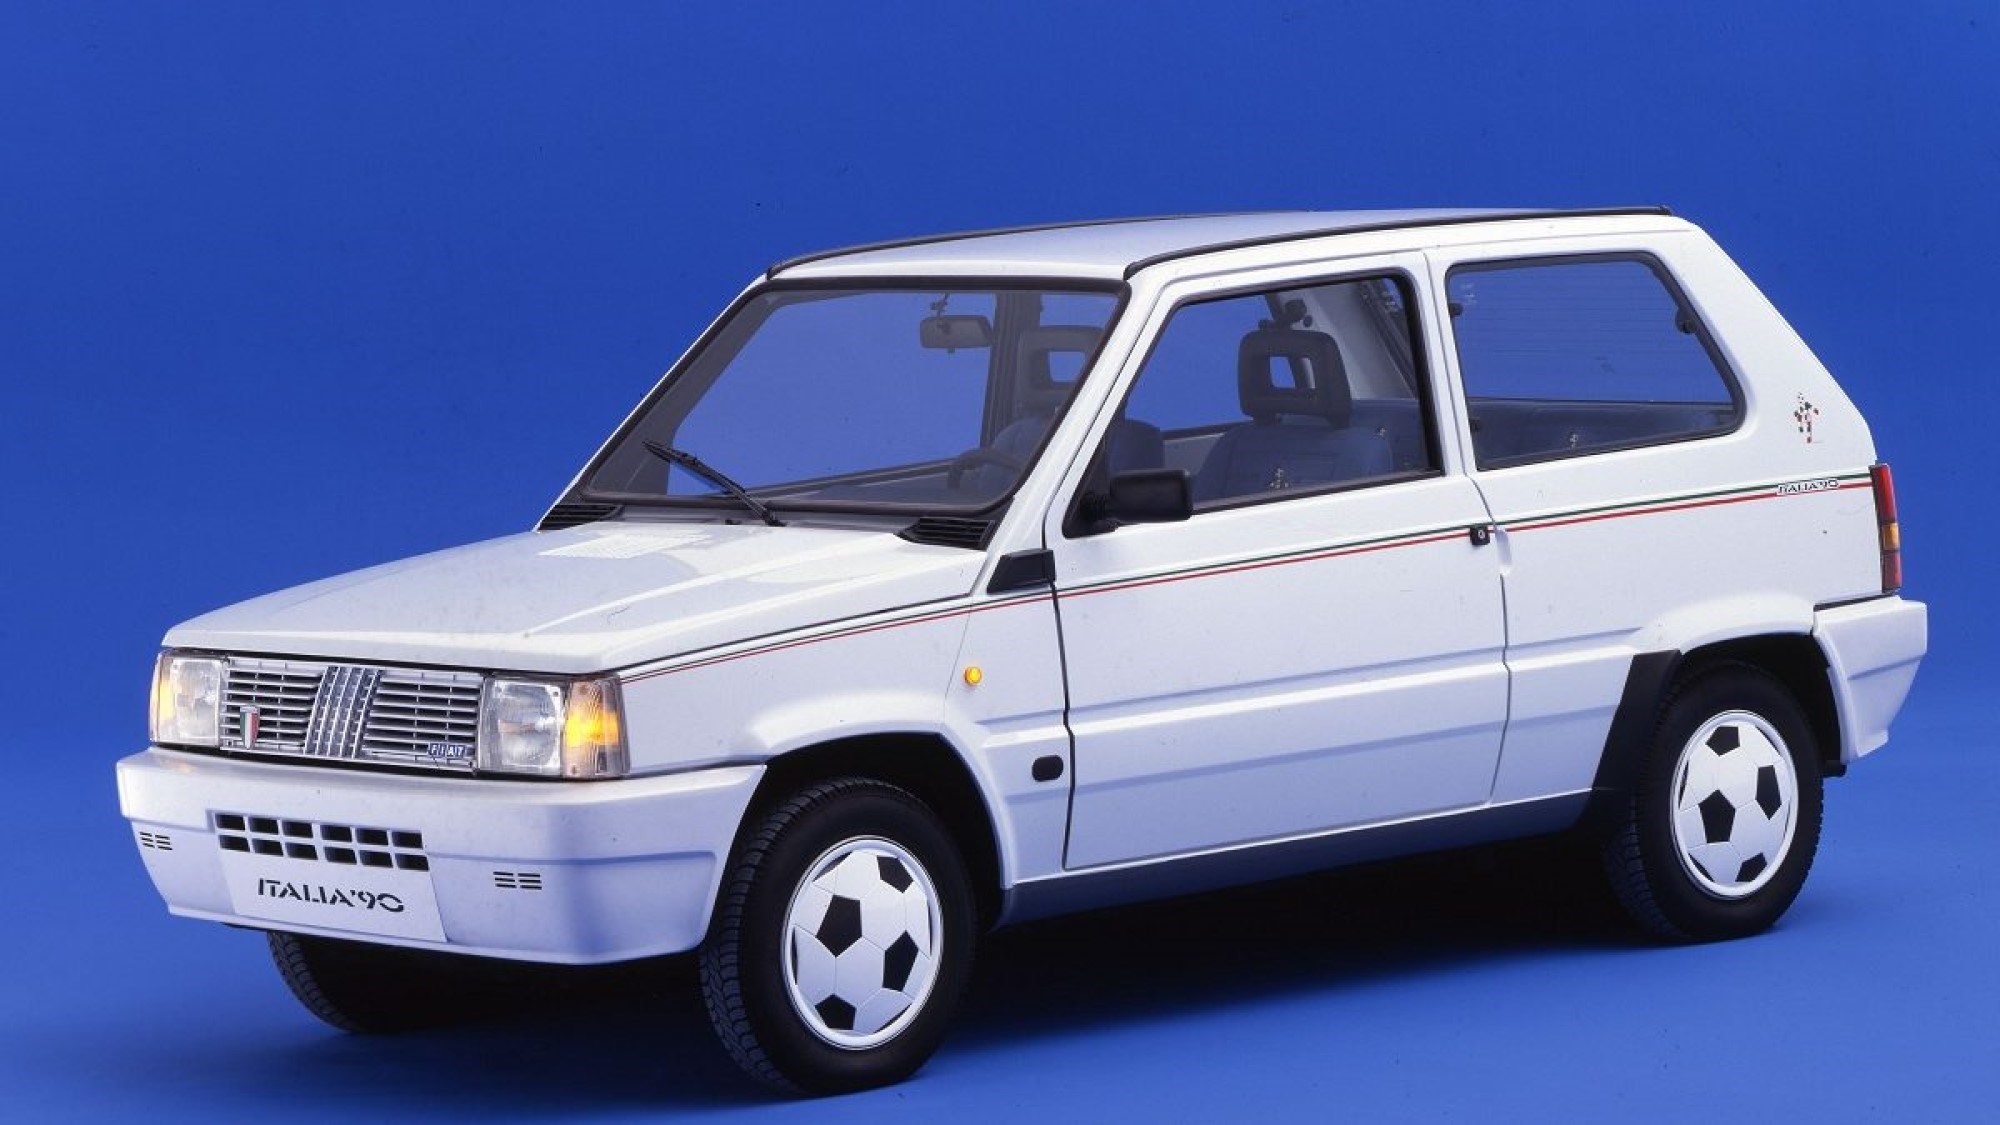 Fiat Panda at 40: history of an Italian institution